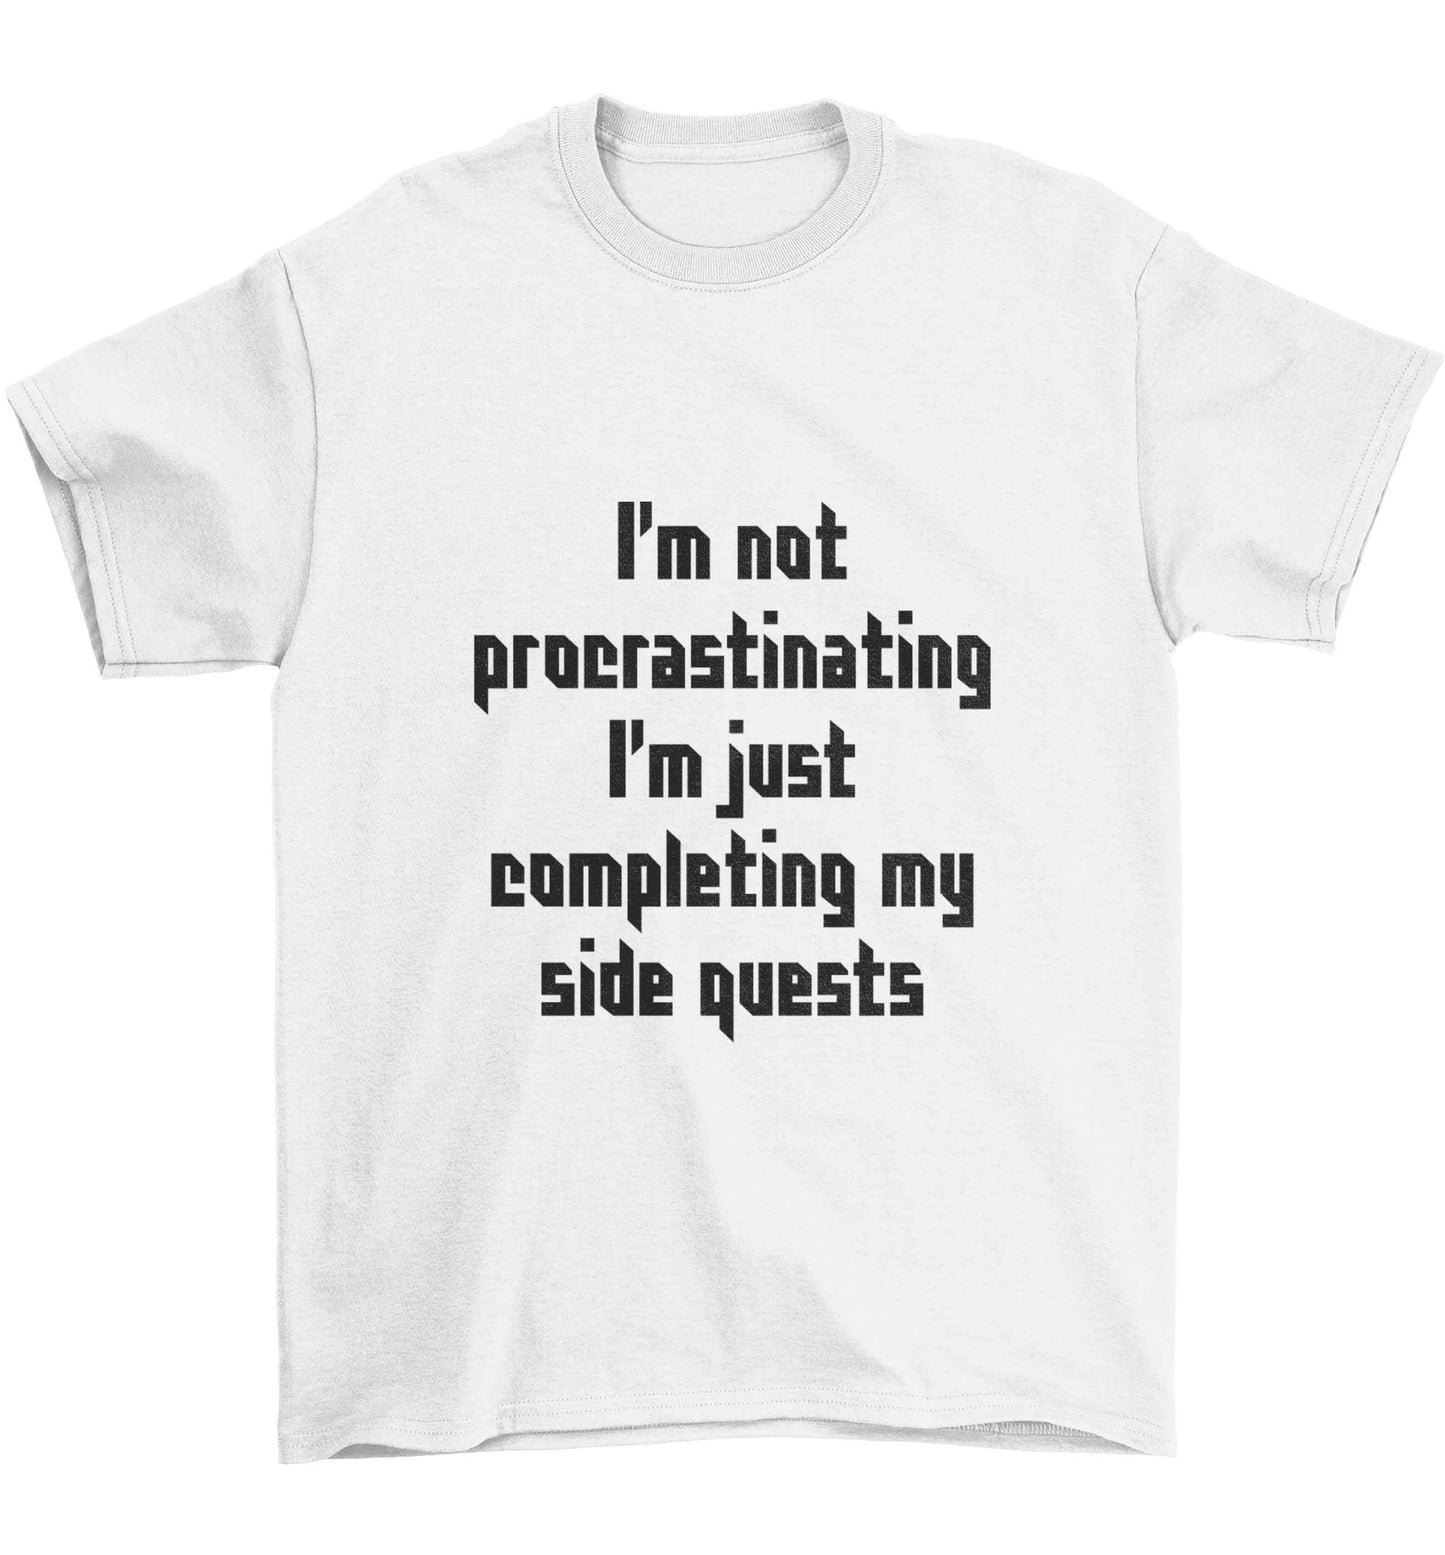 I'm not procrastinating I'm just completing my side quests Children's white Tshirt 12-13 Years